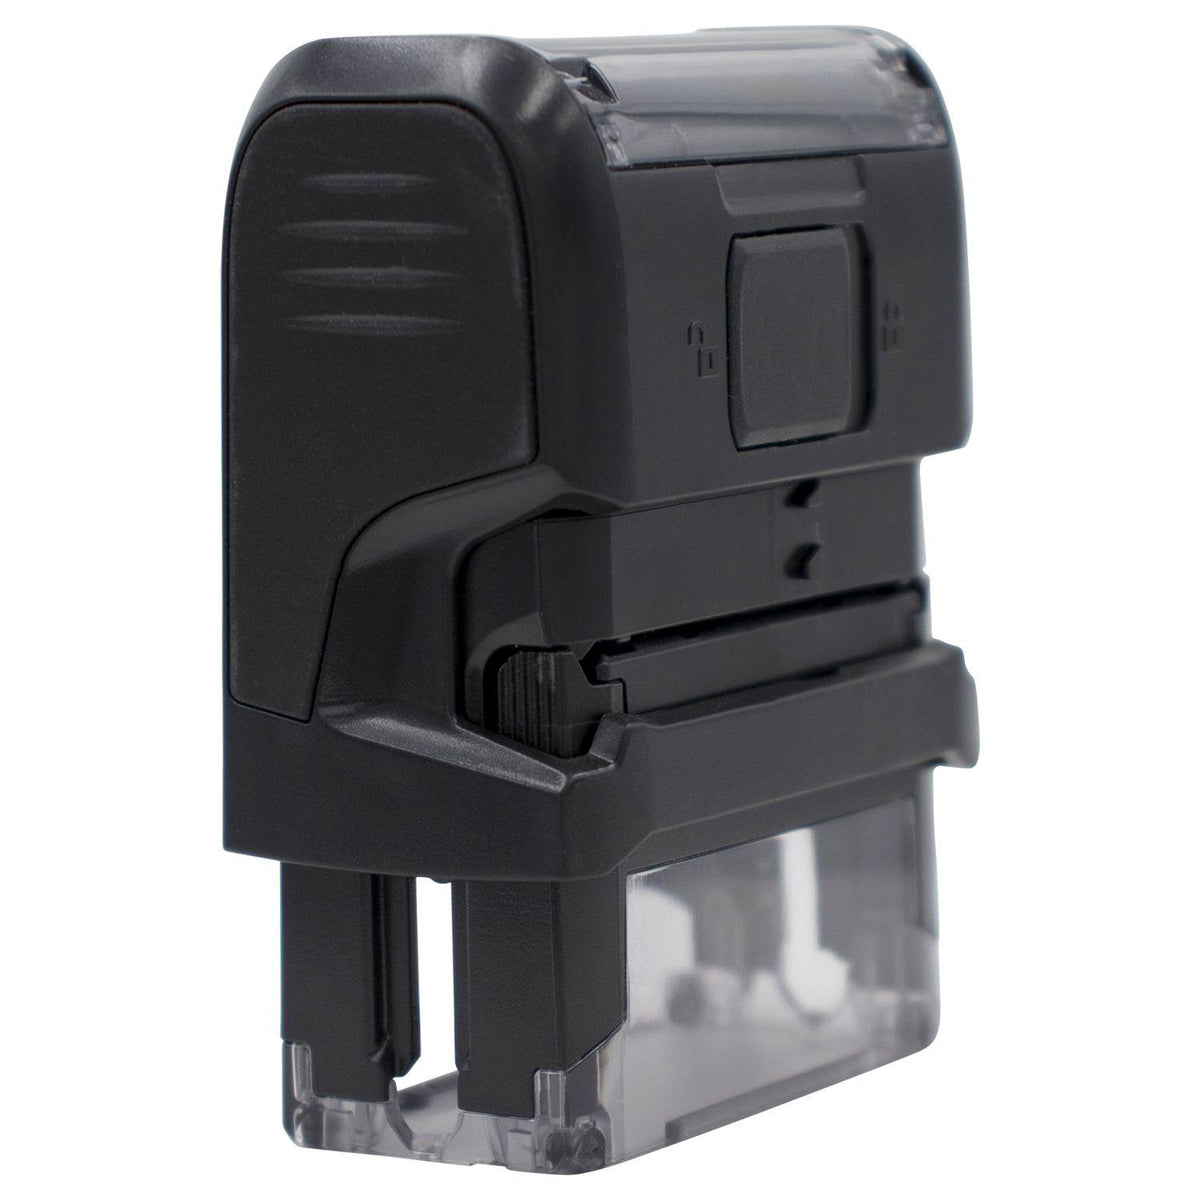 Large Self Inking Rush Stamp - Engineer Seal Stamps - Brand_Trodat, Impression Size_Large, Stamp Type_Self-Inking Stamp, Type of Use_Postal &amp; Mailing, Type of Use_Shipping &amp; Receiving